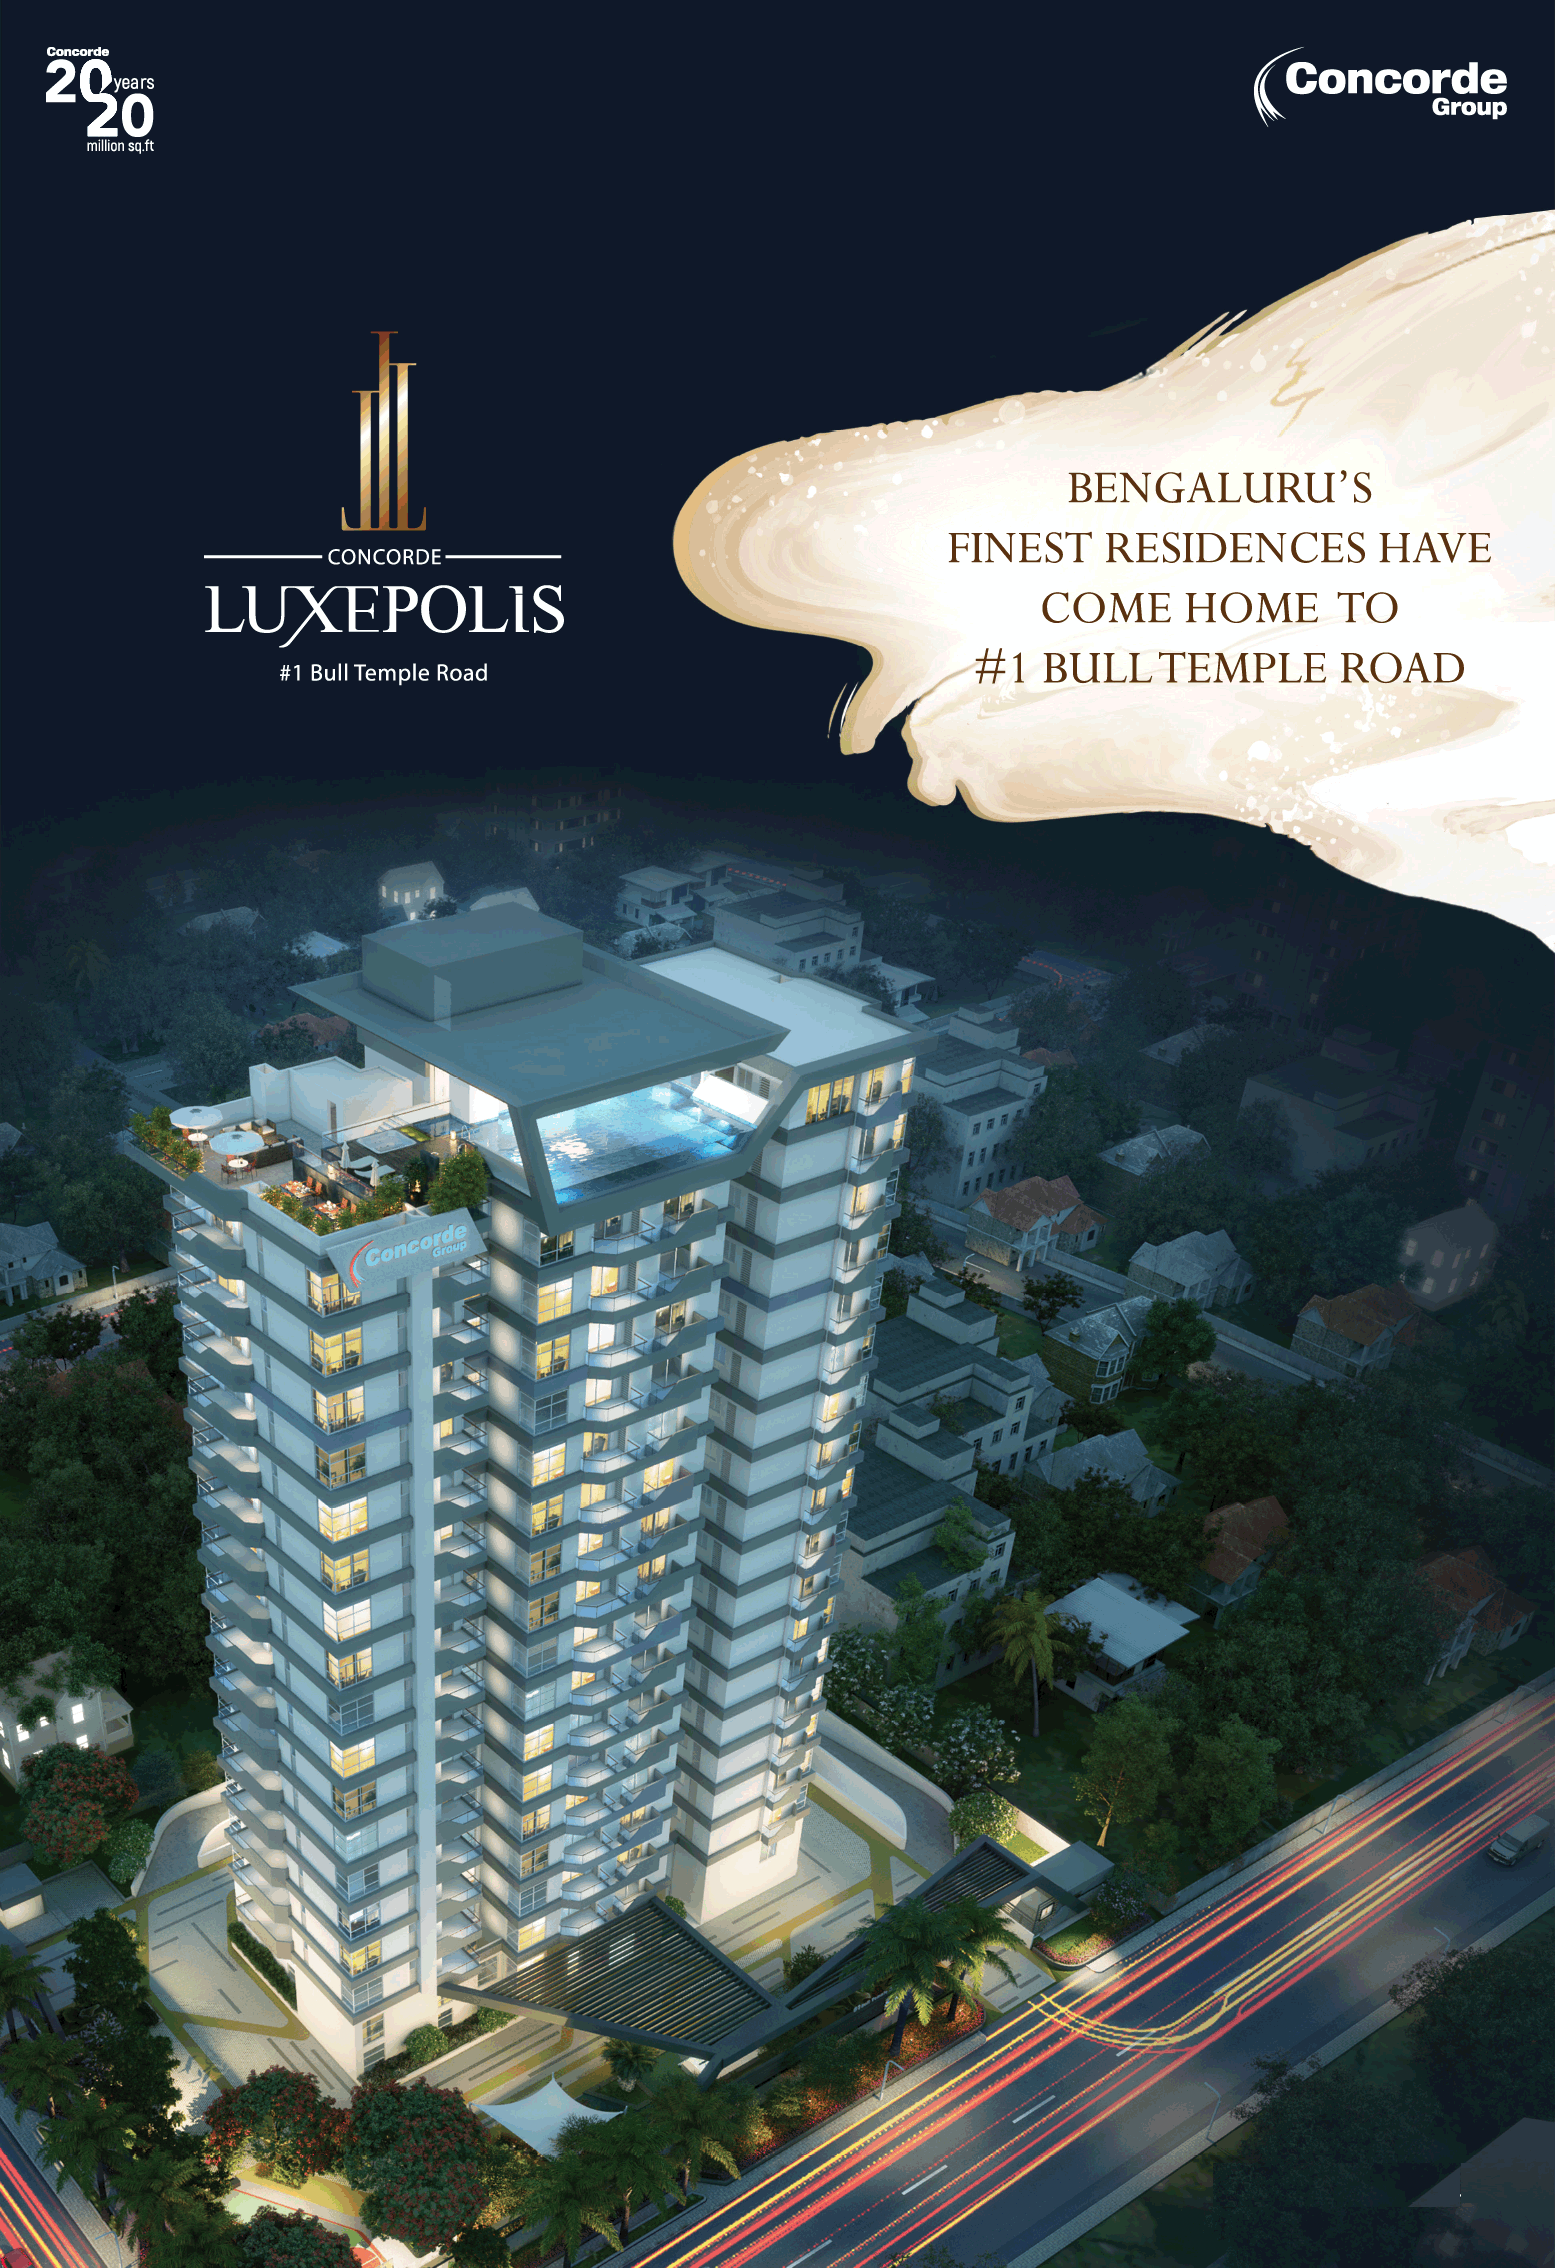 Book finest residences at Concorde Luxepolis in Bangalore